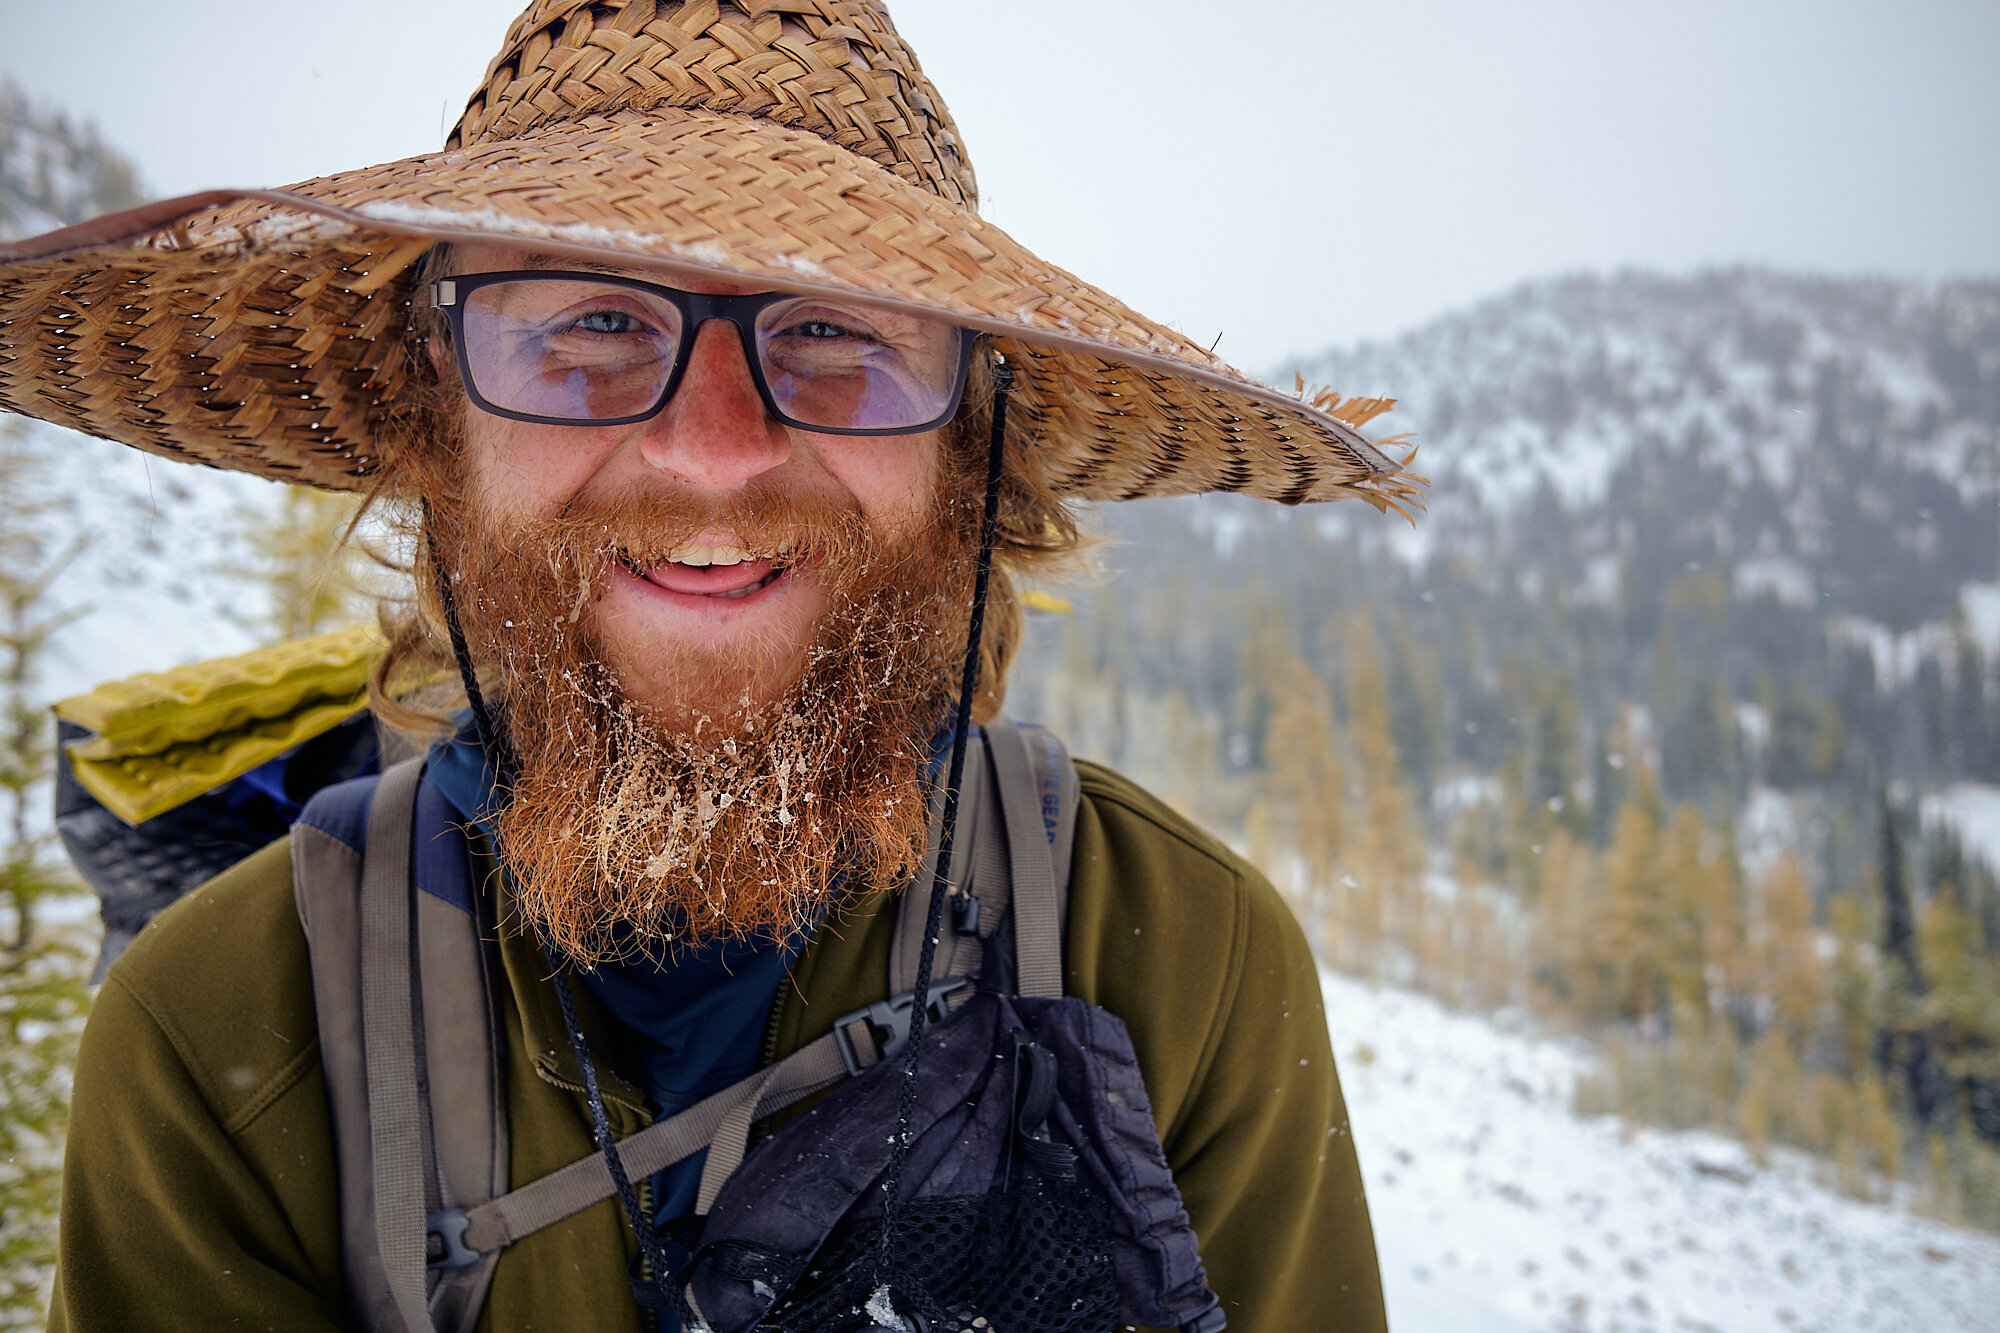  Lebowski in good spirits despite having to backtrack 30 miles from the border in sub-freezing temperatures. | 10/8/19 Mile 2,627.2, 6,295' 